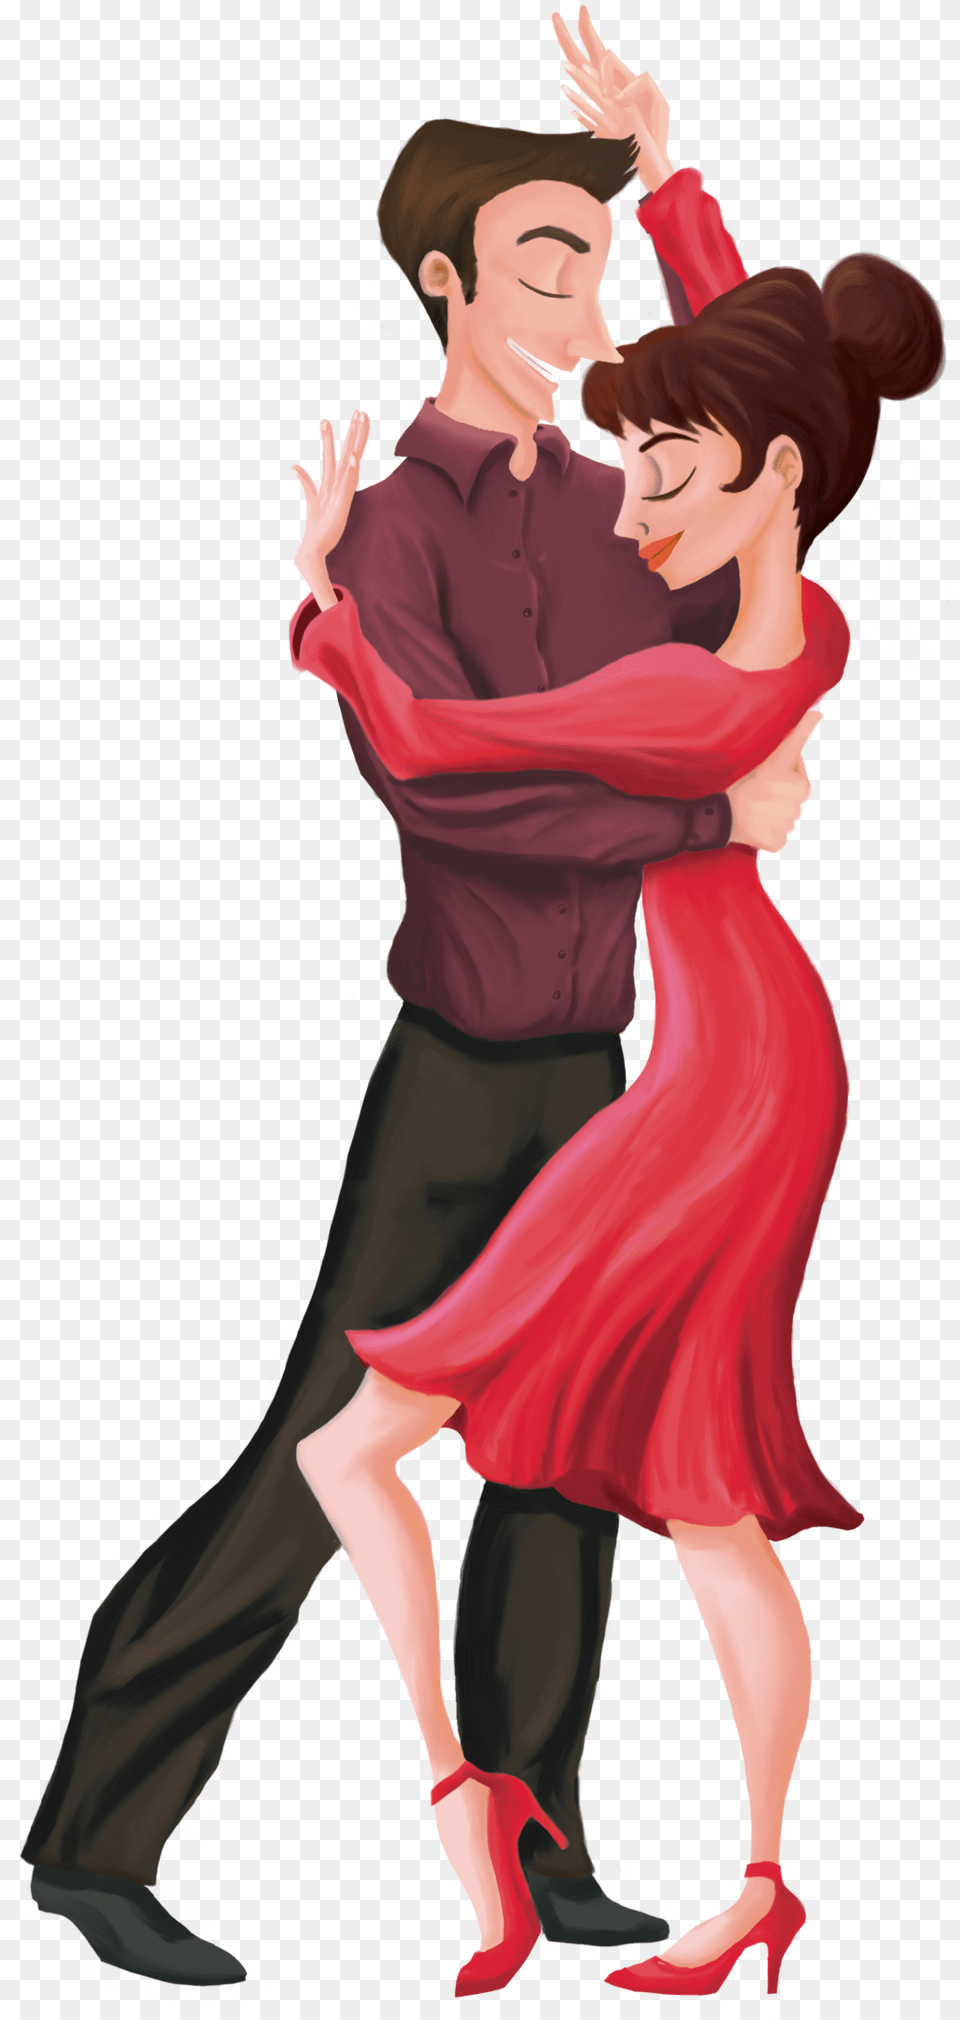 Couple 3 Numero Tango Download Cartoon, Adult, Person, Leisure Activities, Woman Png